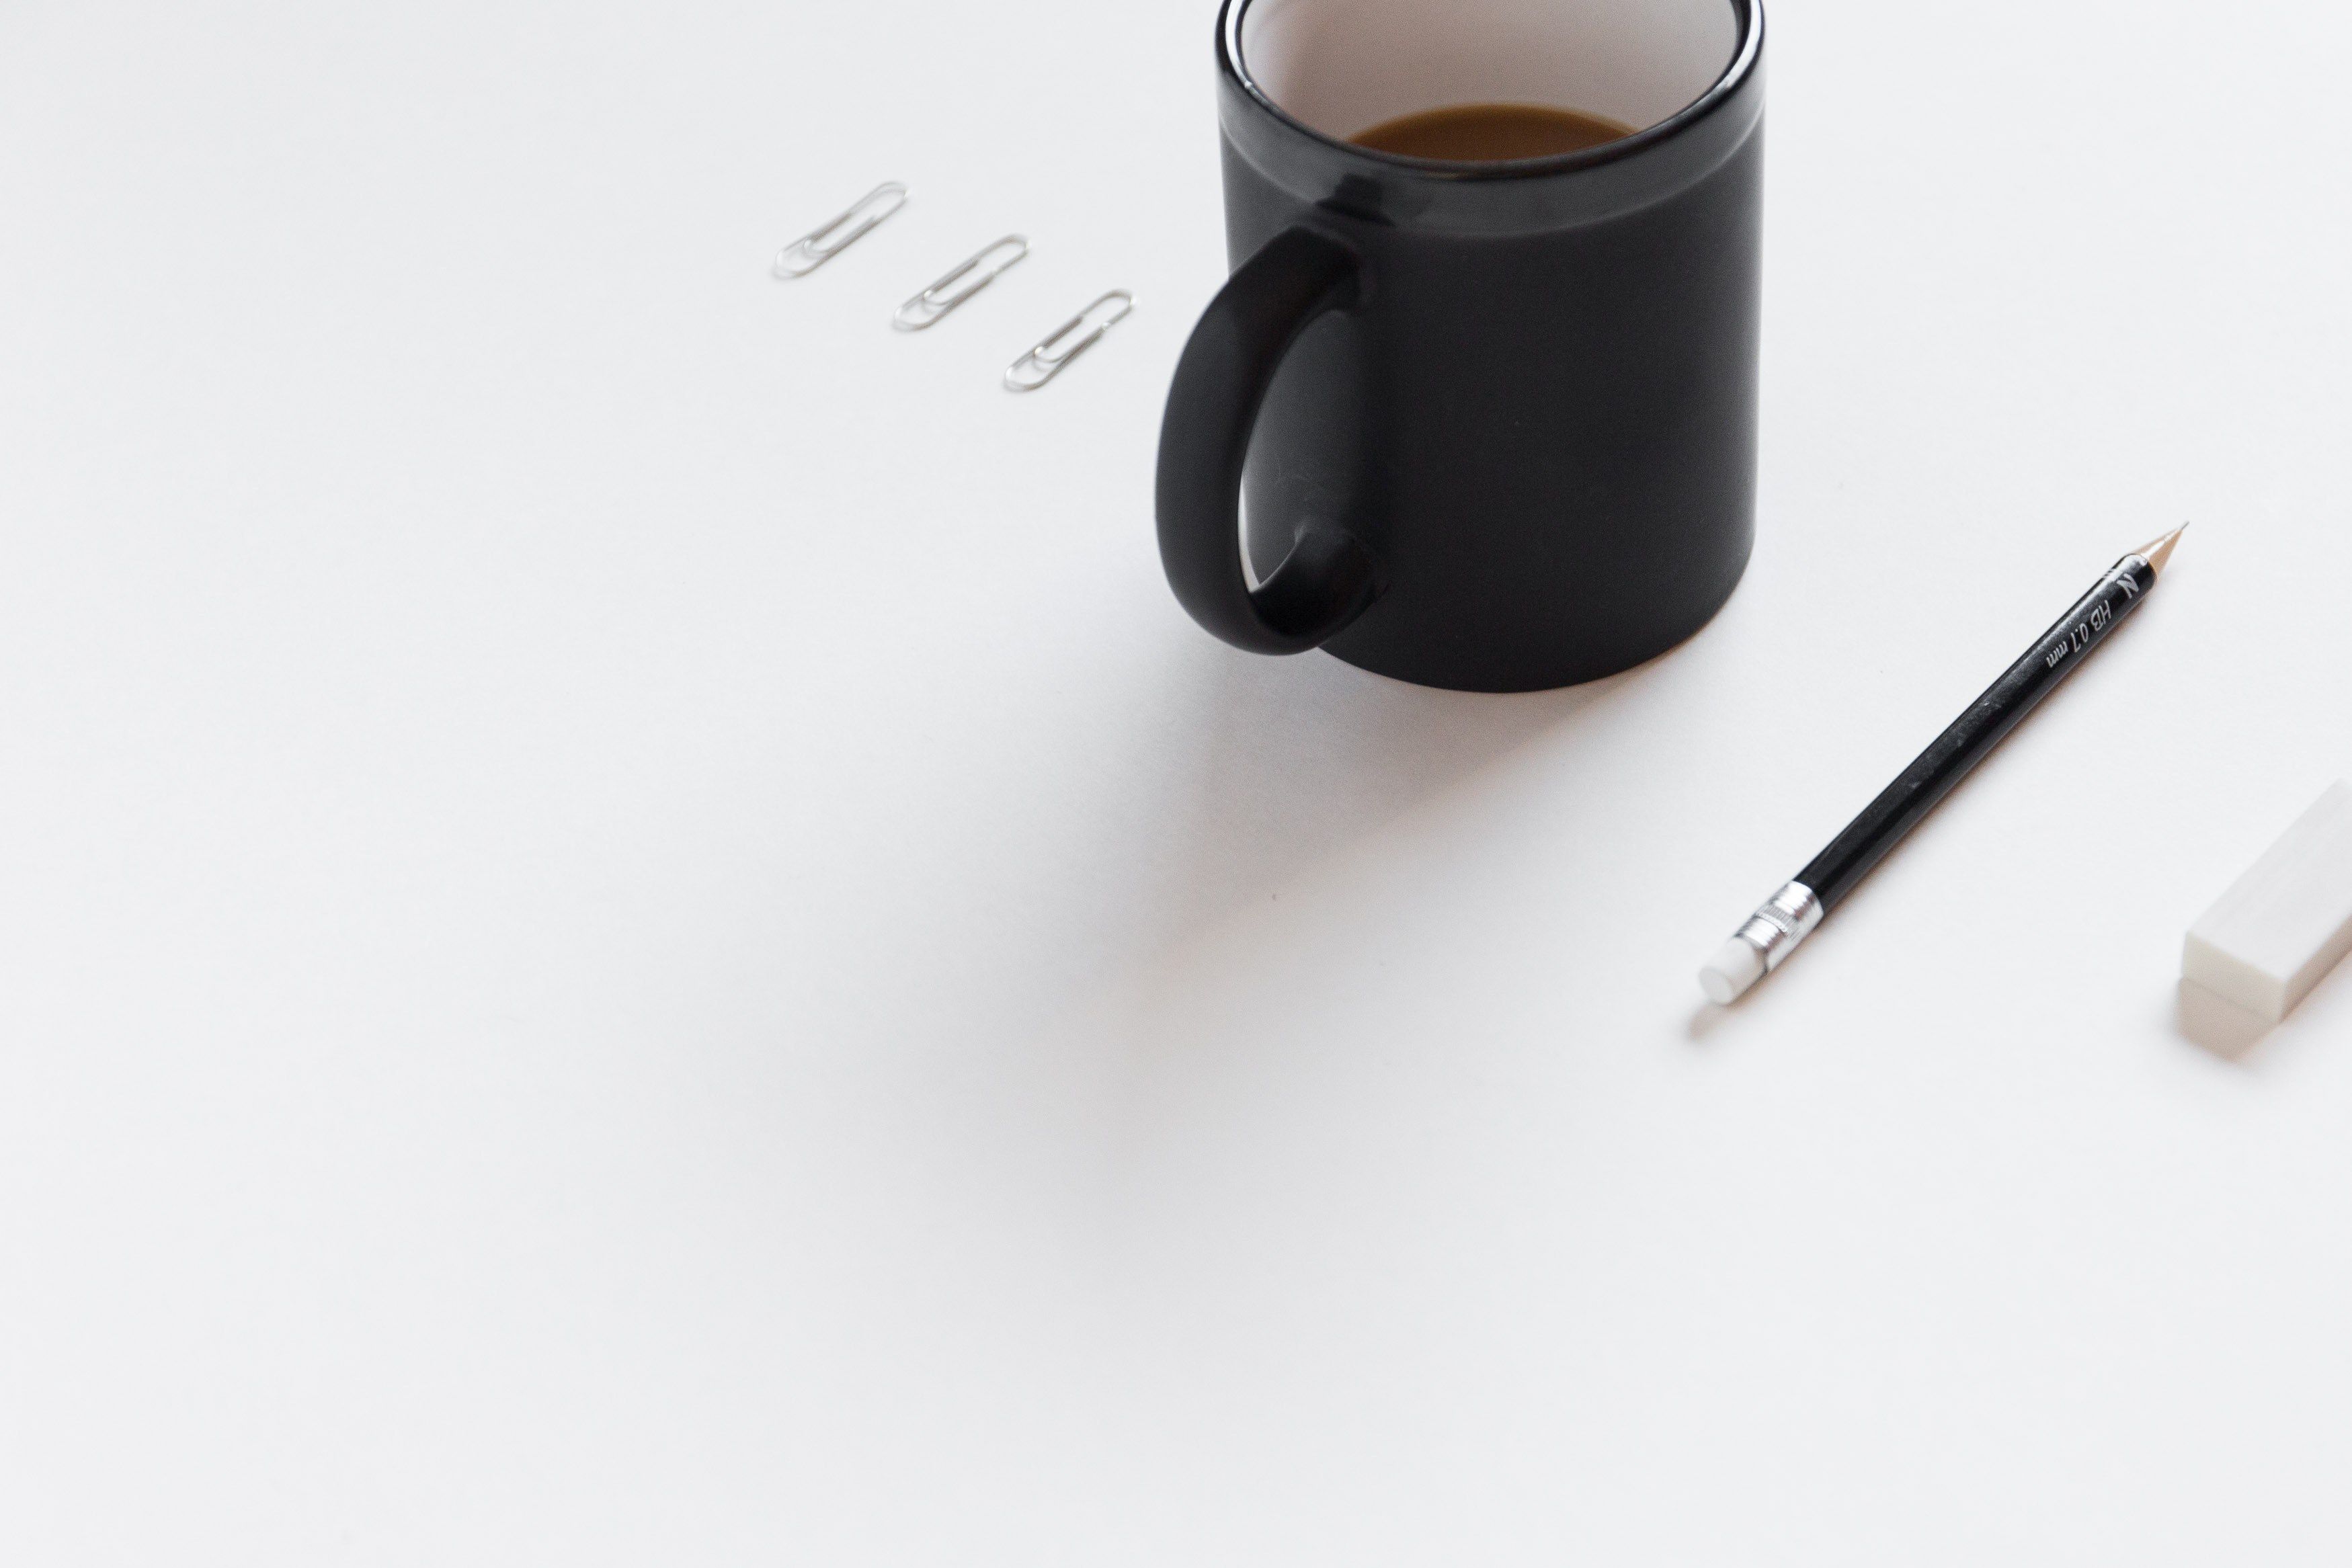 Wallpaper / a pencil an eraser and paper clips next to a cup of coffee, office supplies and coffee 4k wallpaper